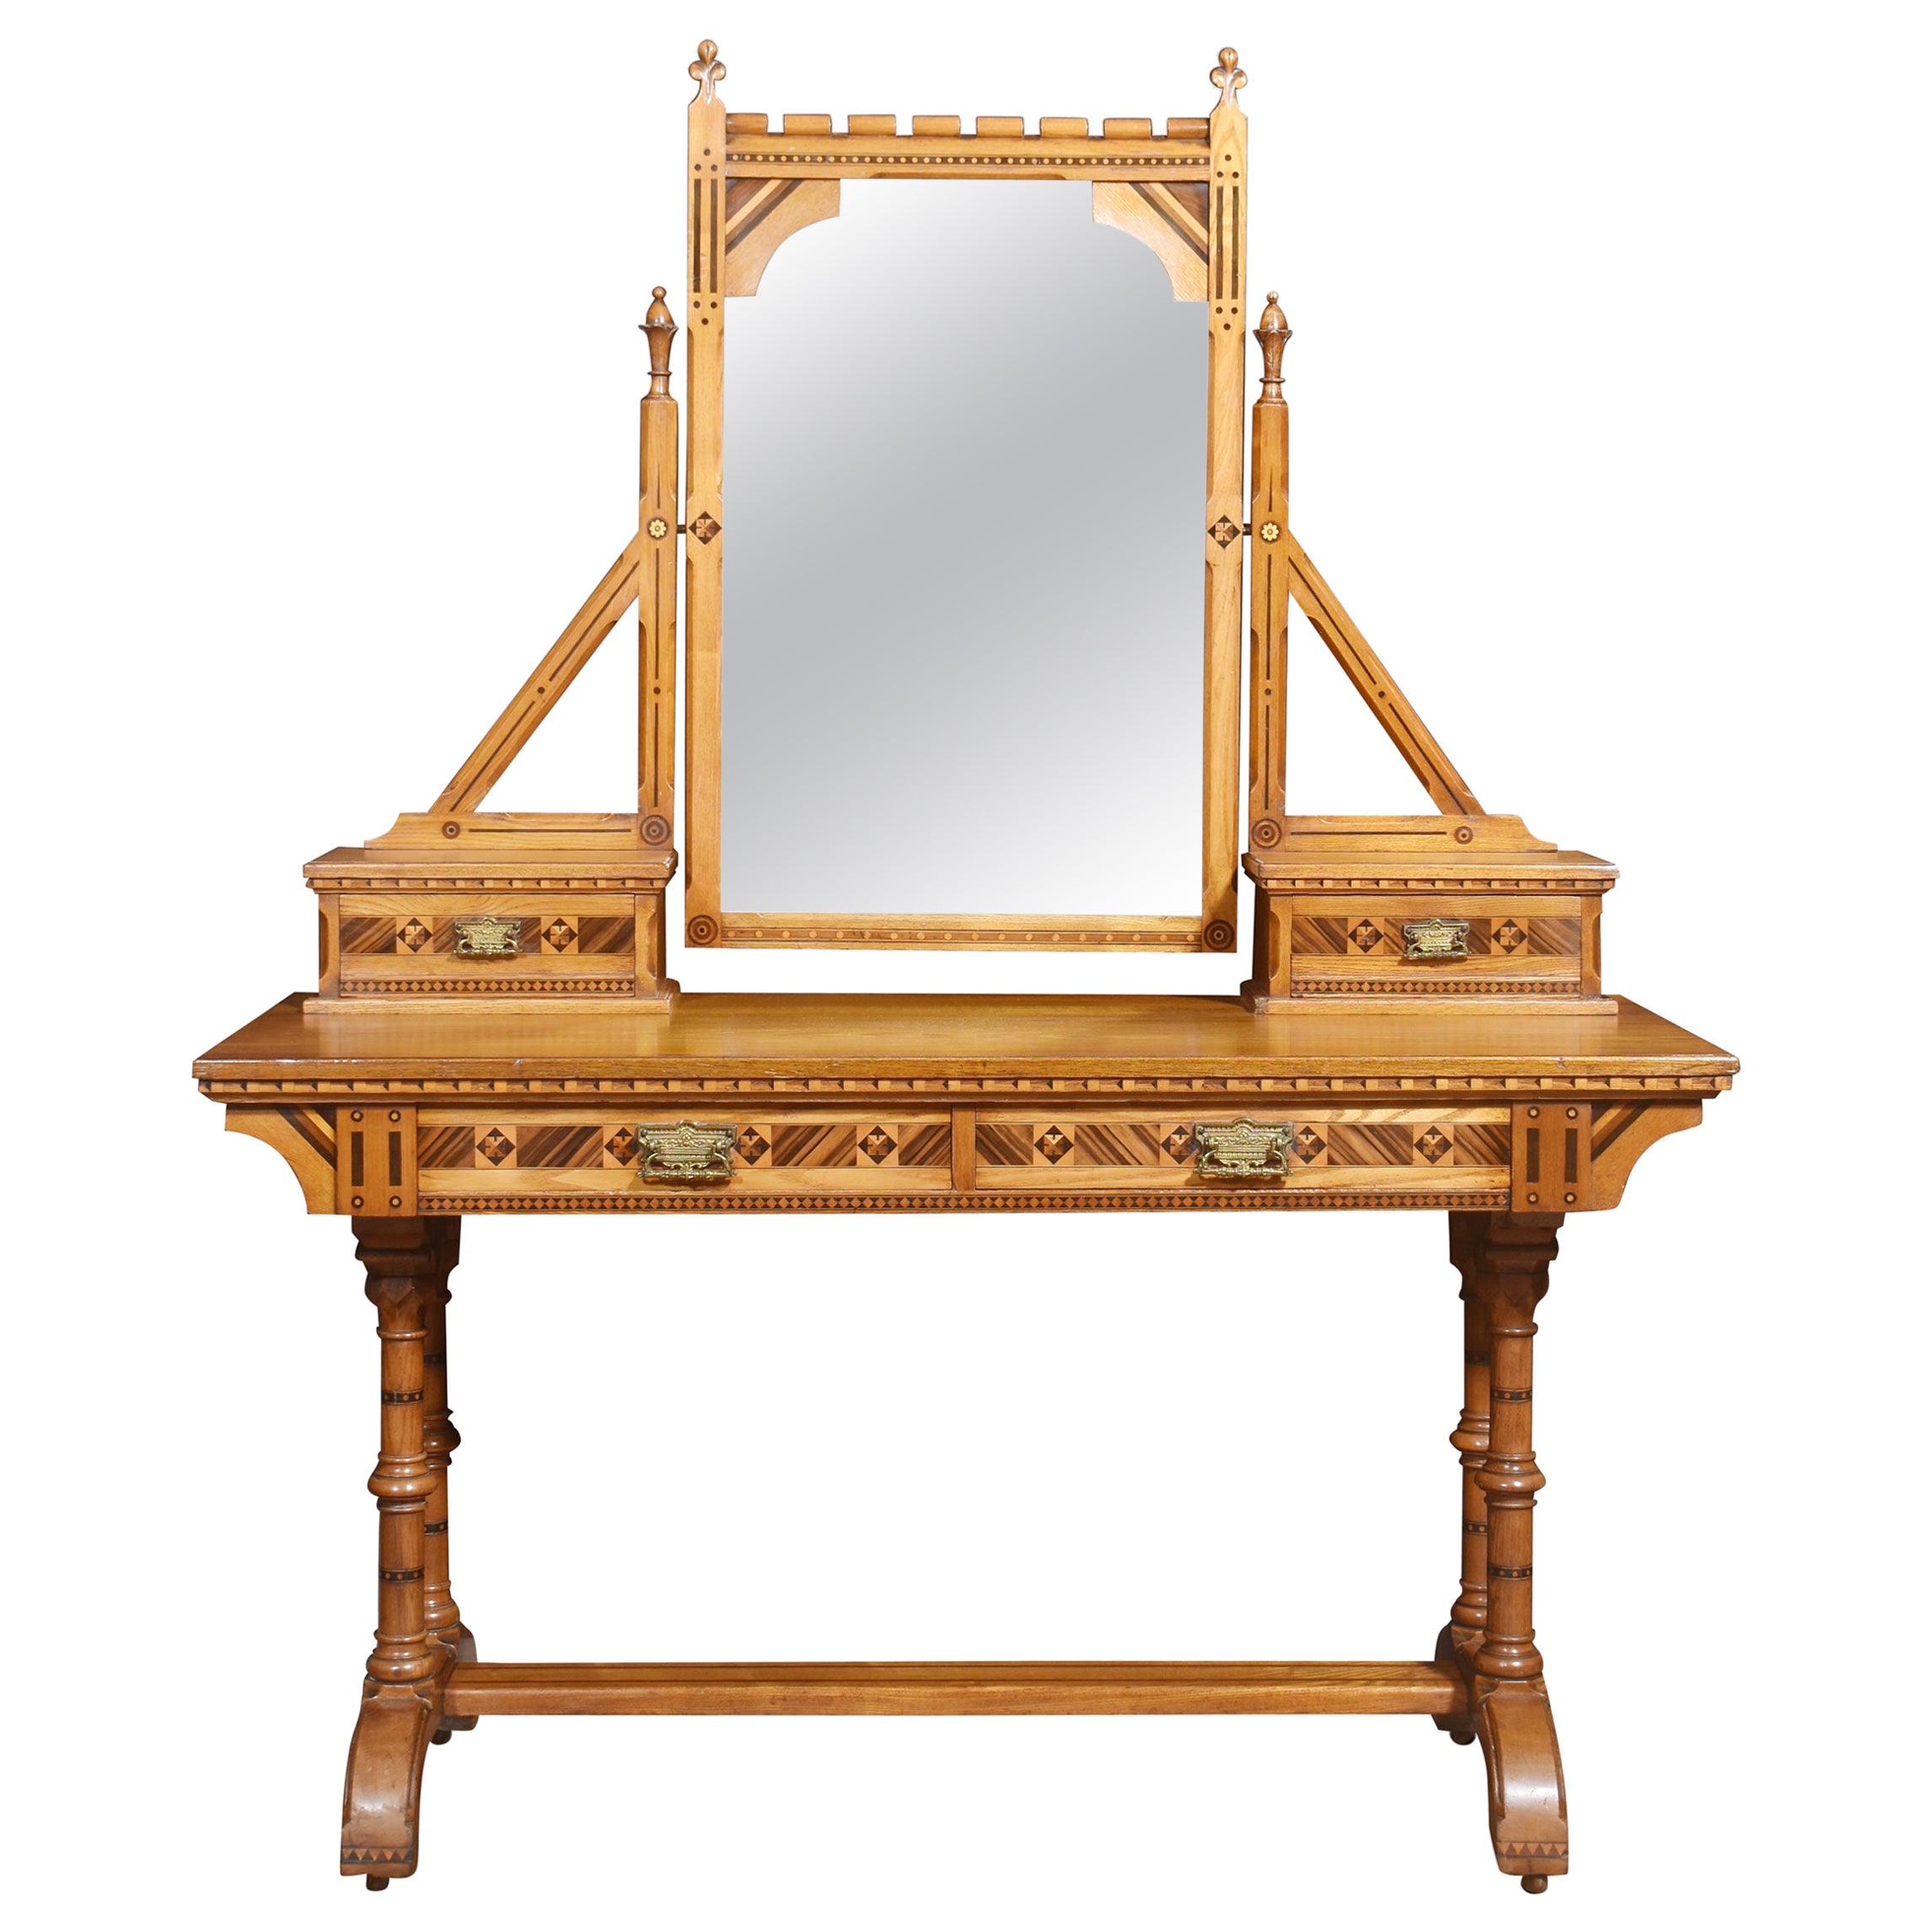 Aesthetic Movement dressing table